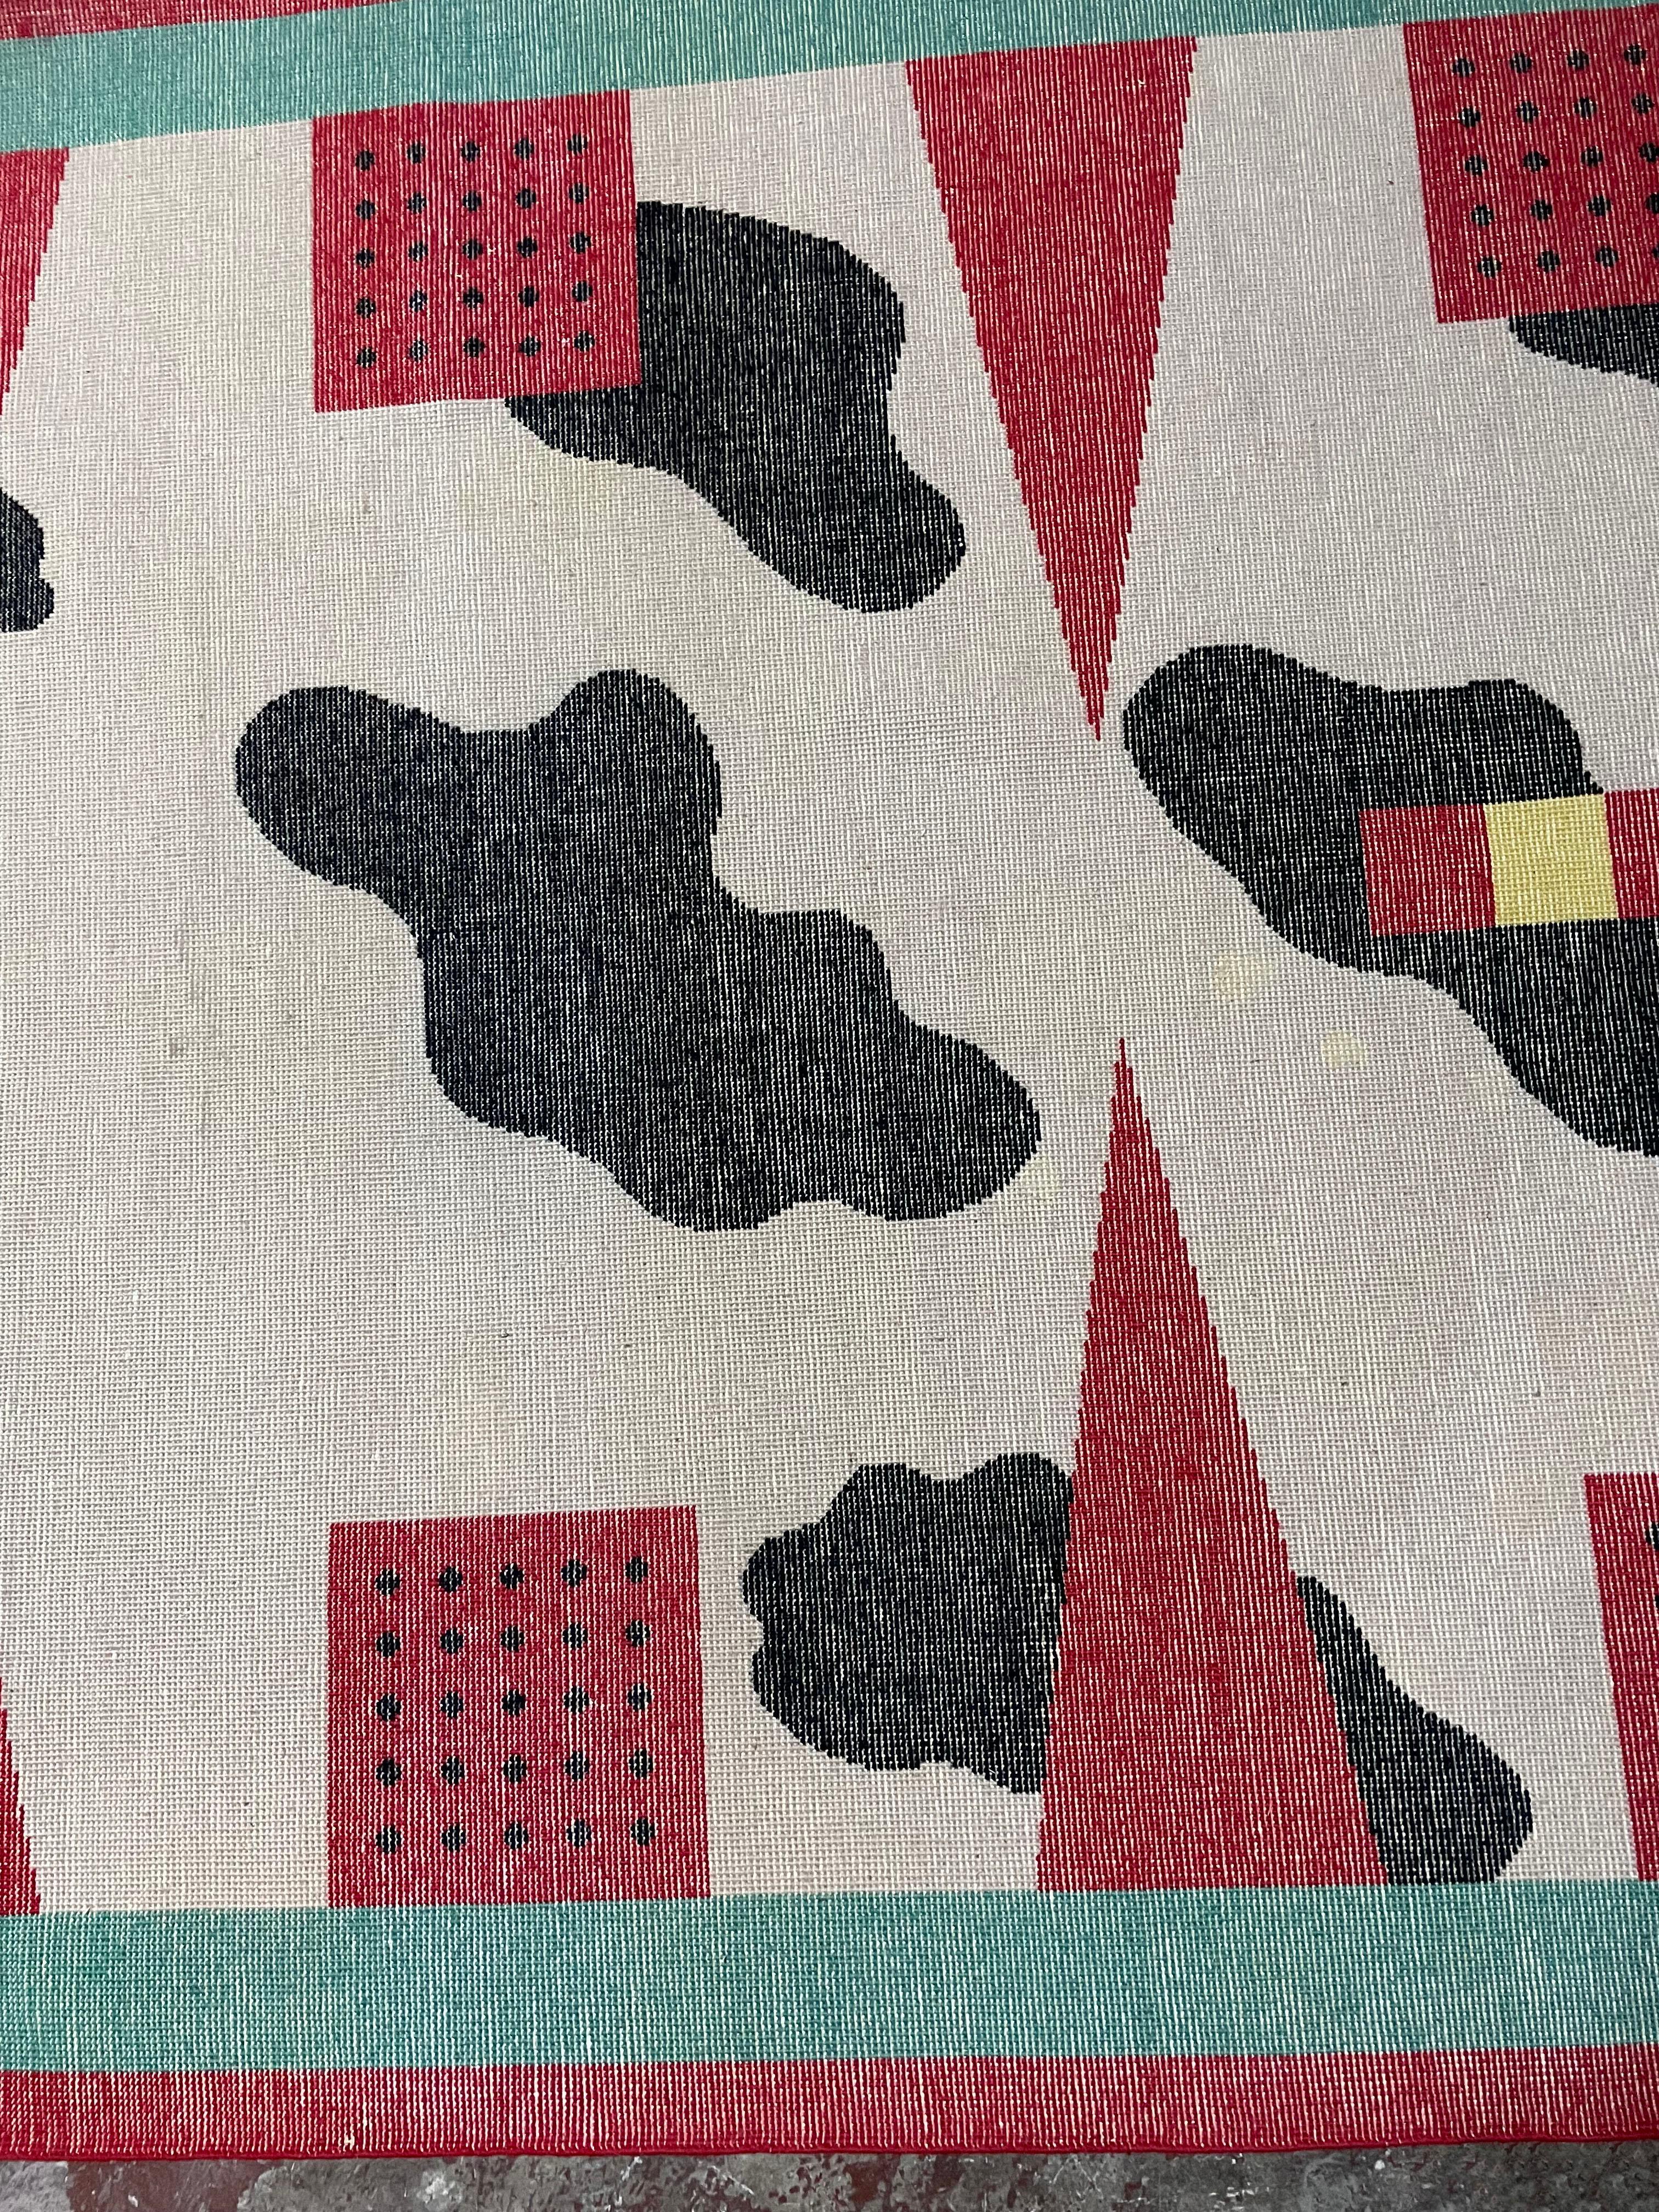 Hand-Woven California Carpet Designed in 1983 by Nathalie du Pasquier for Memphis Milano